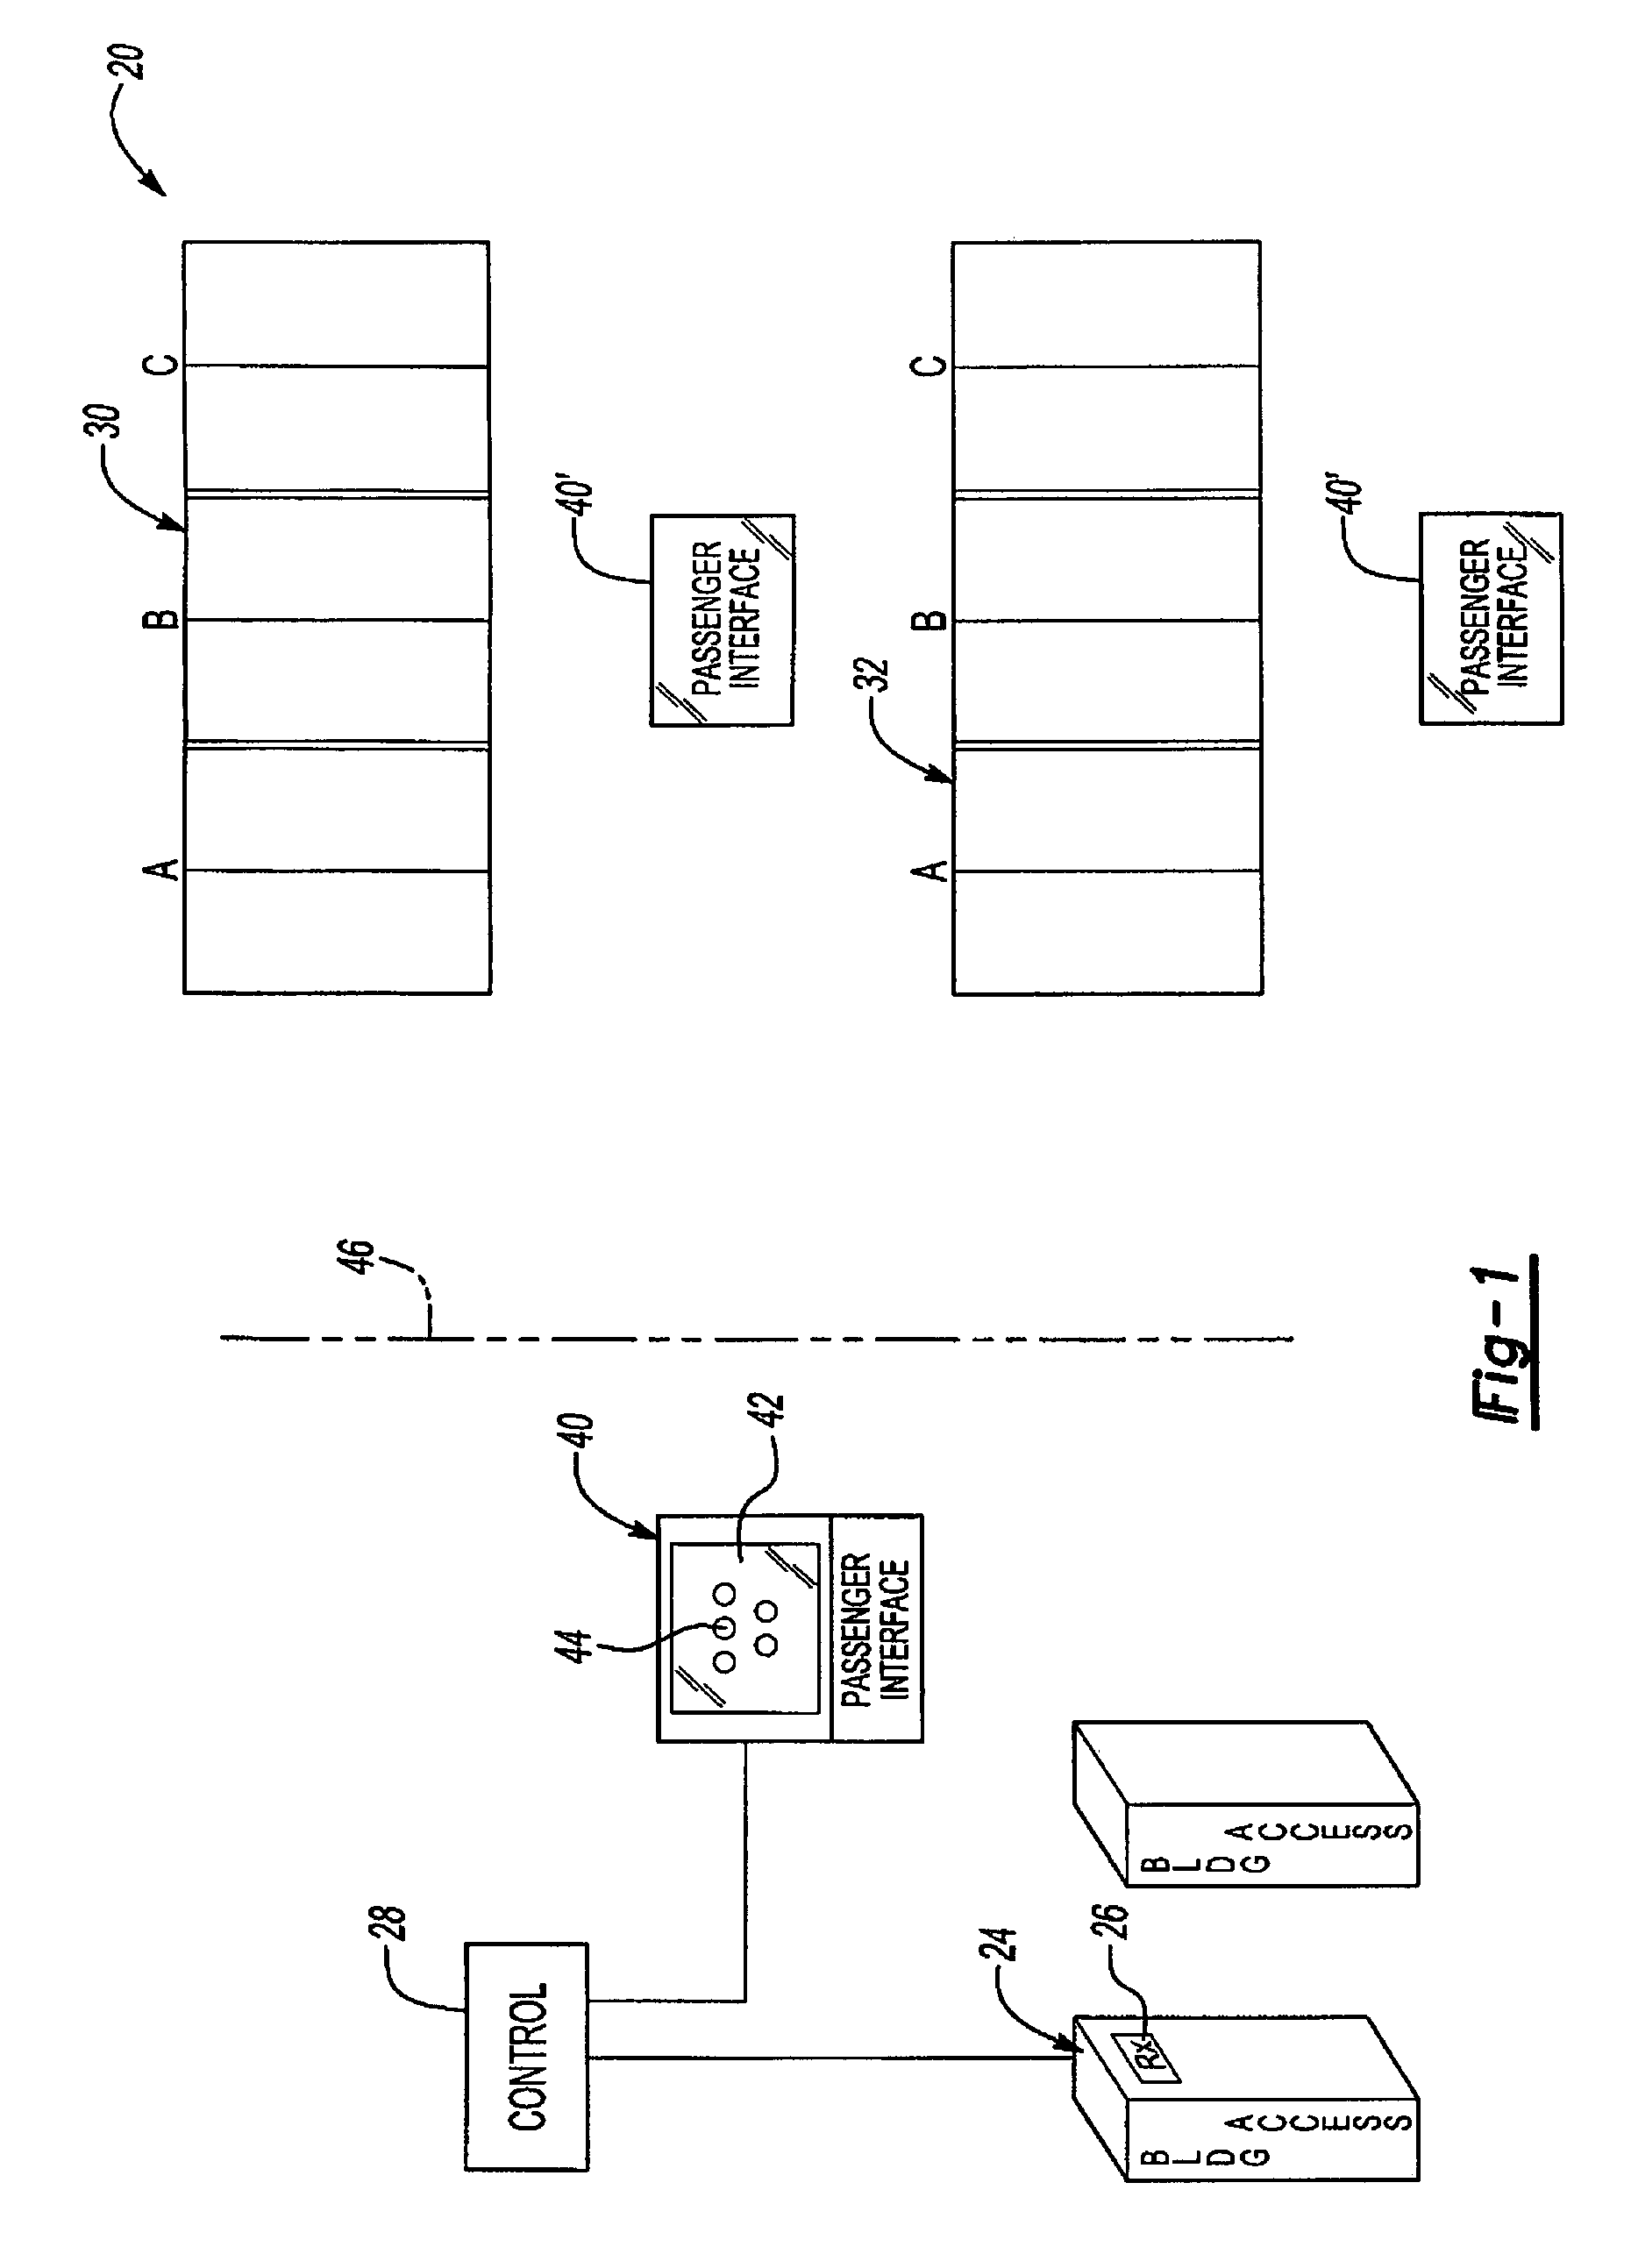 Automatic destination entry system with override capability